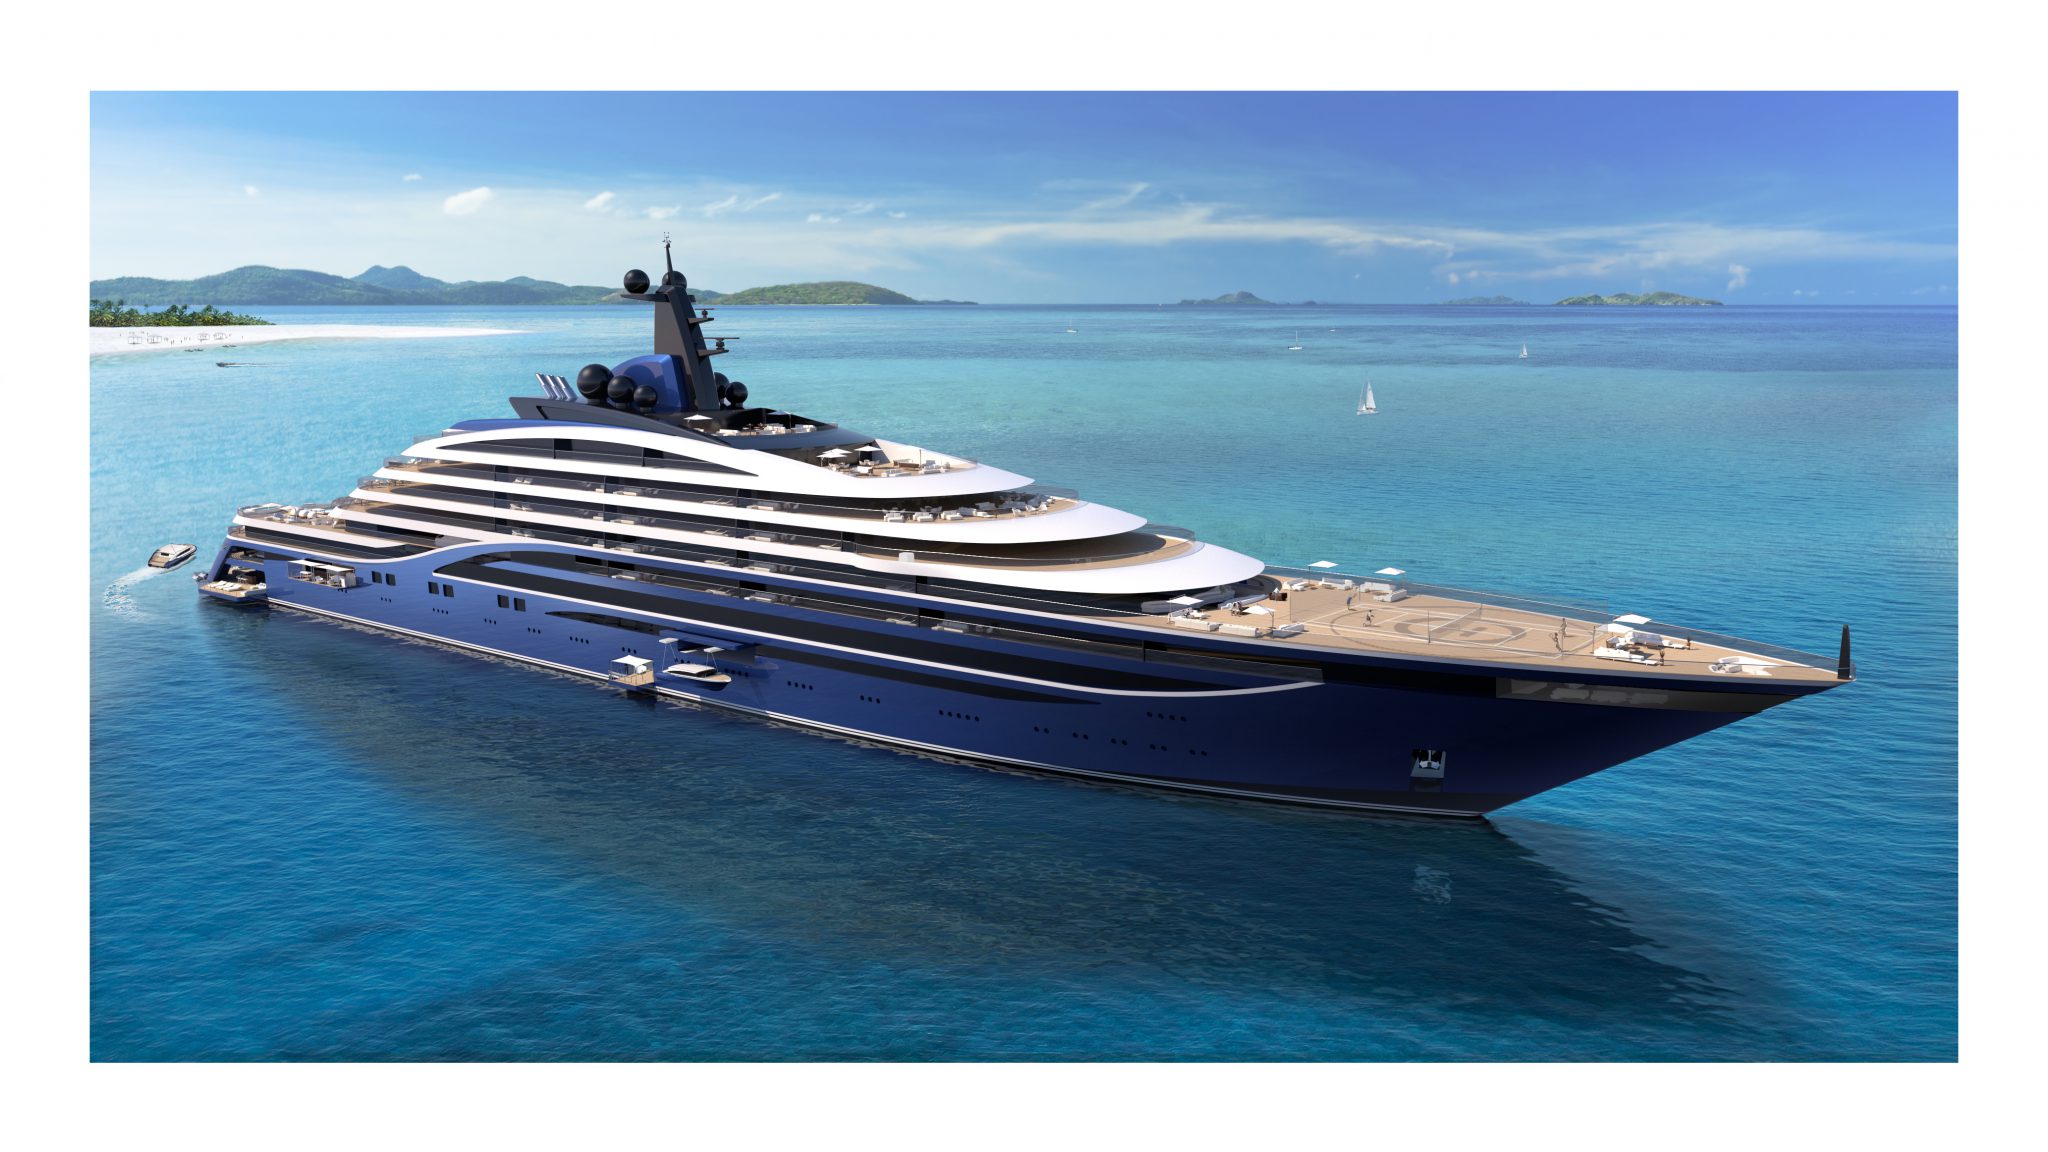 VARD to build largest yacht in the world Yellow & Finch Publishers